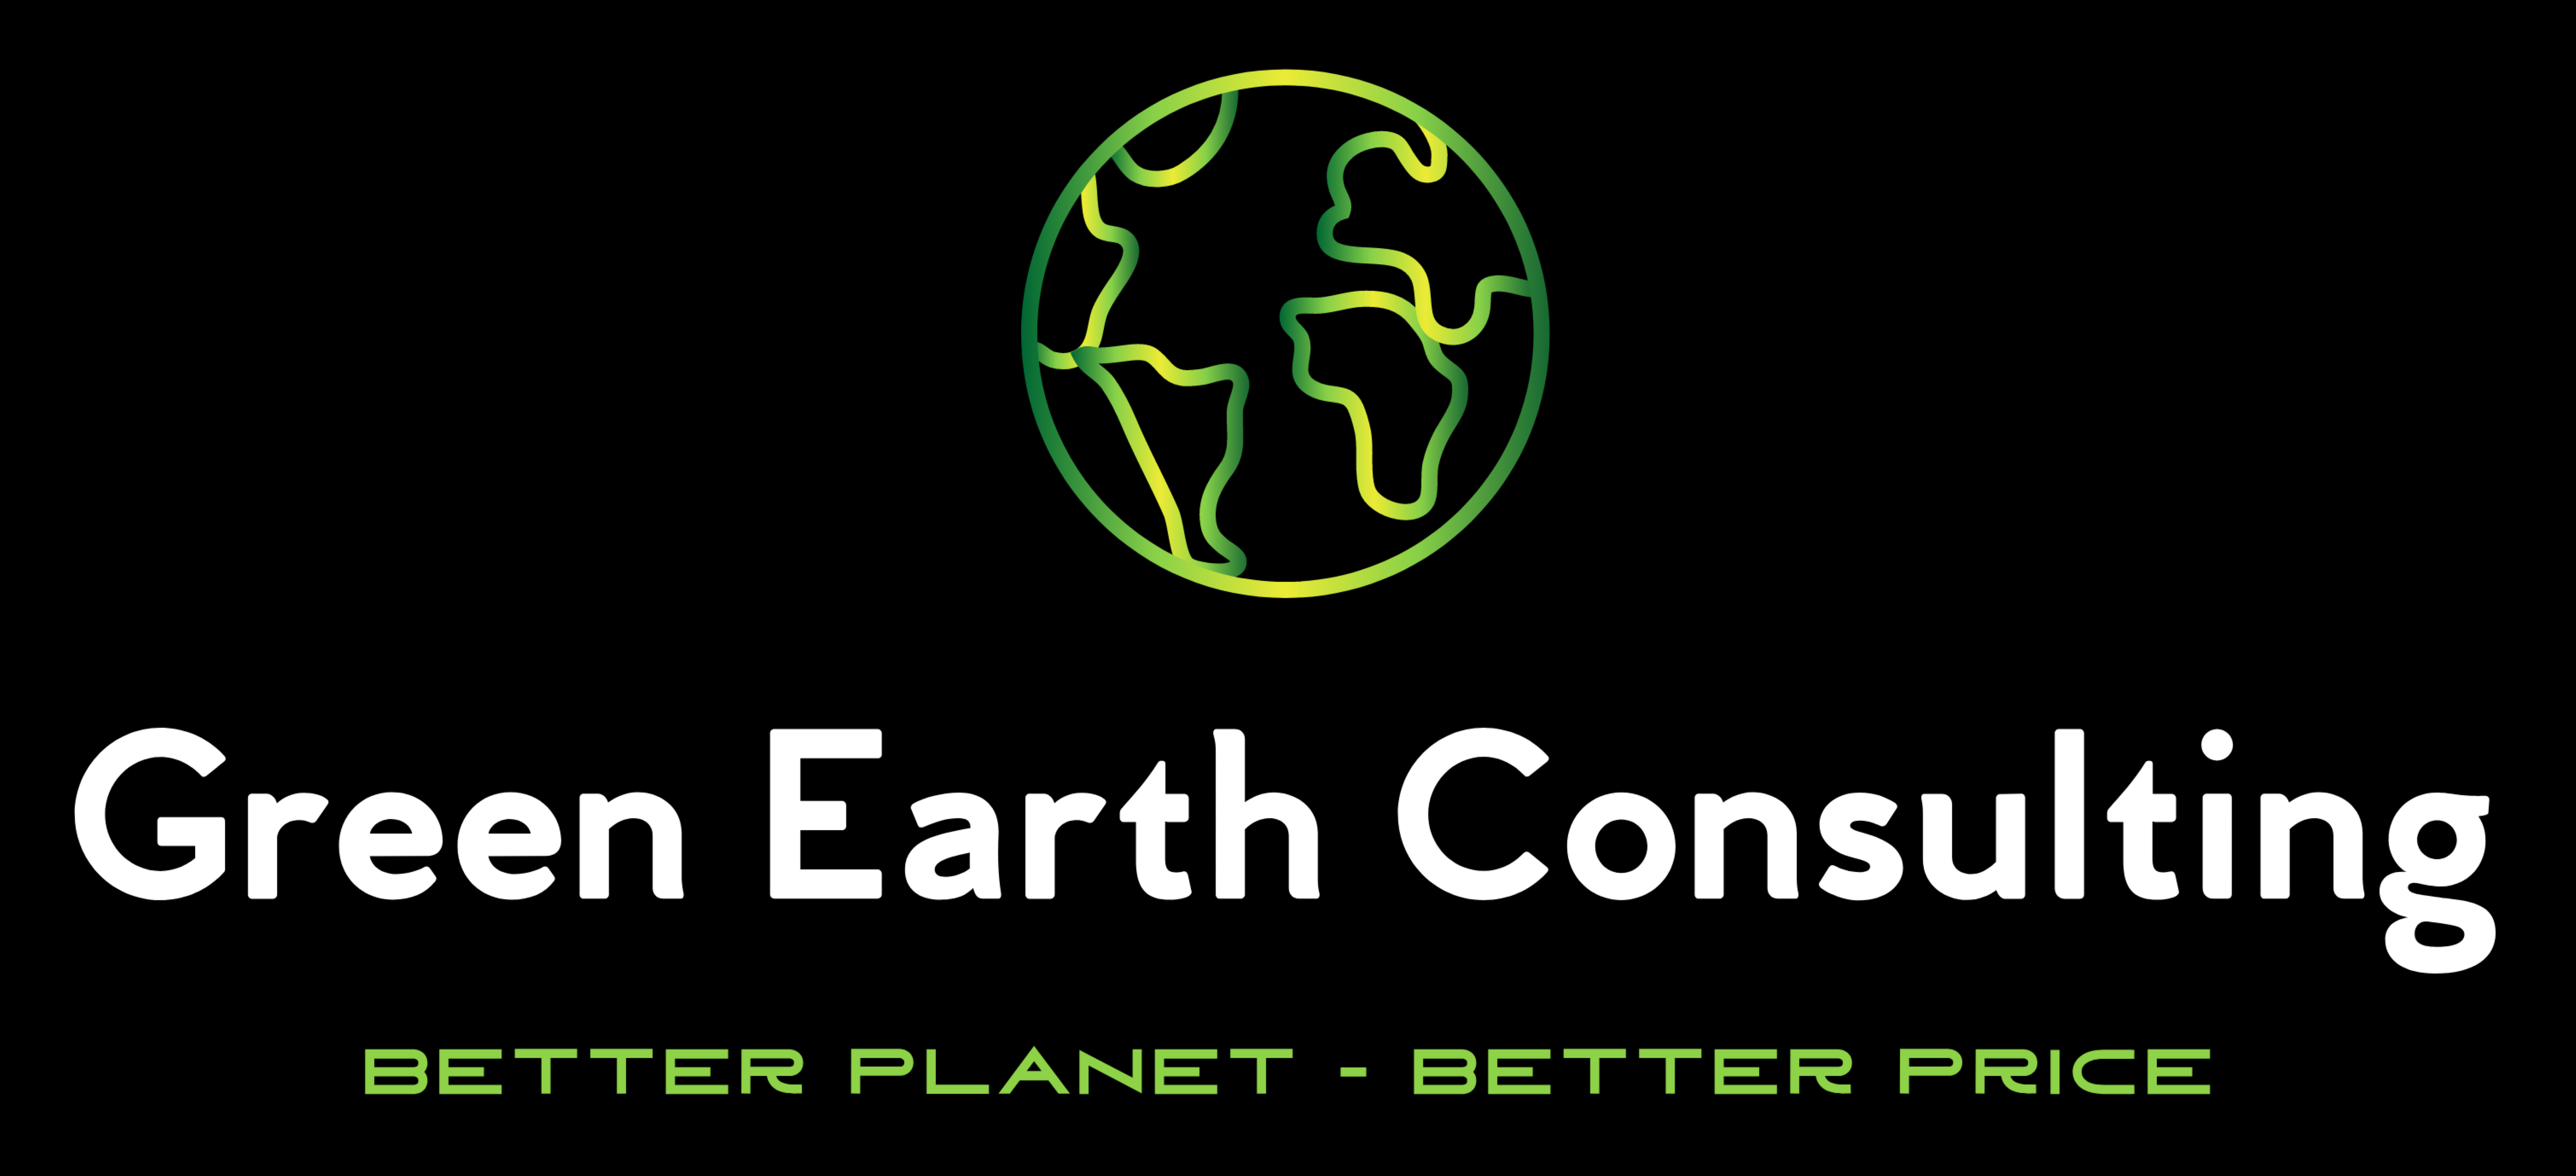 Green Earth Consulting